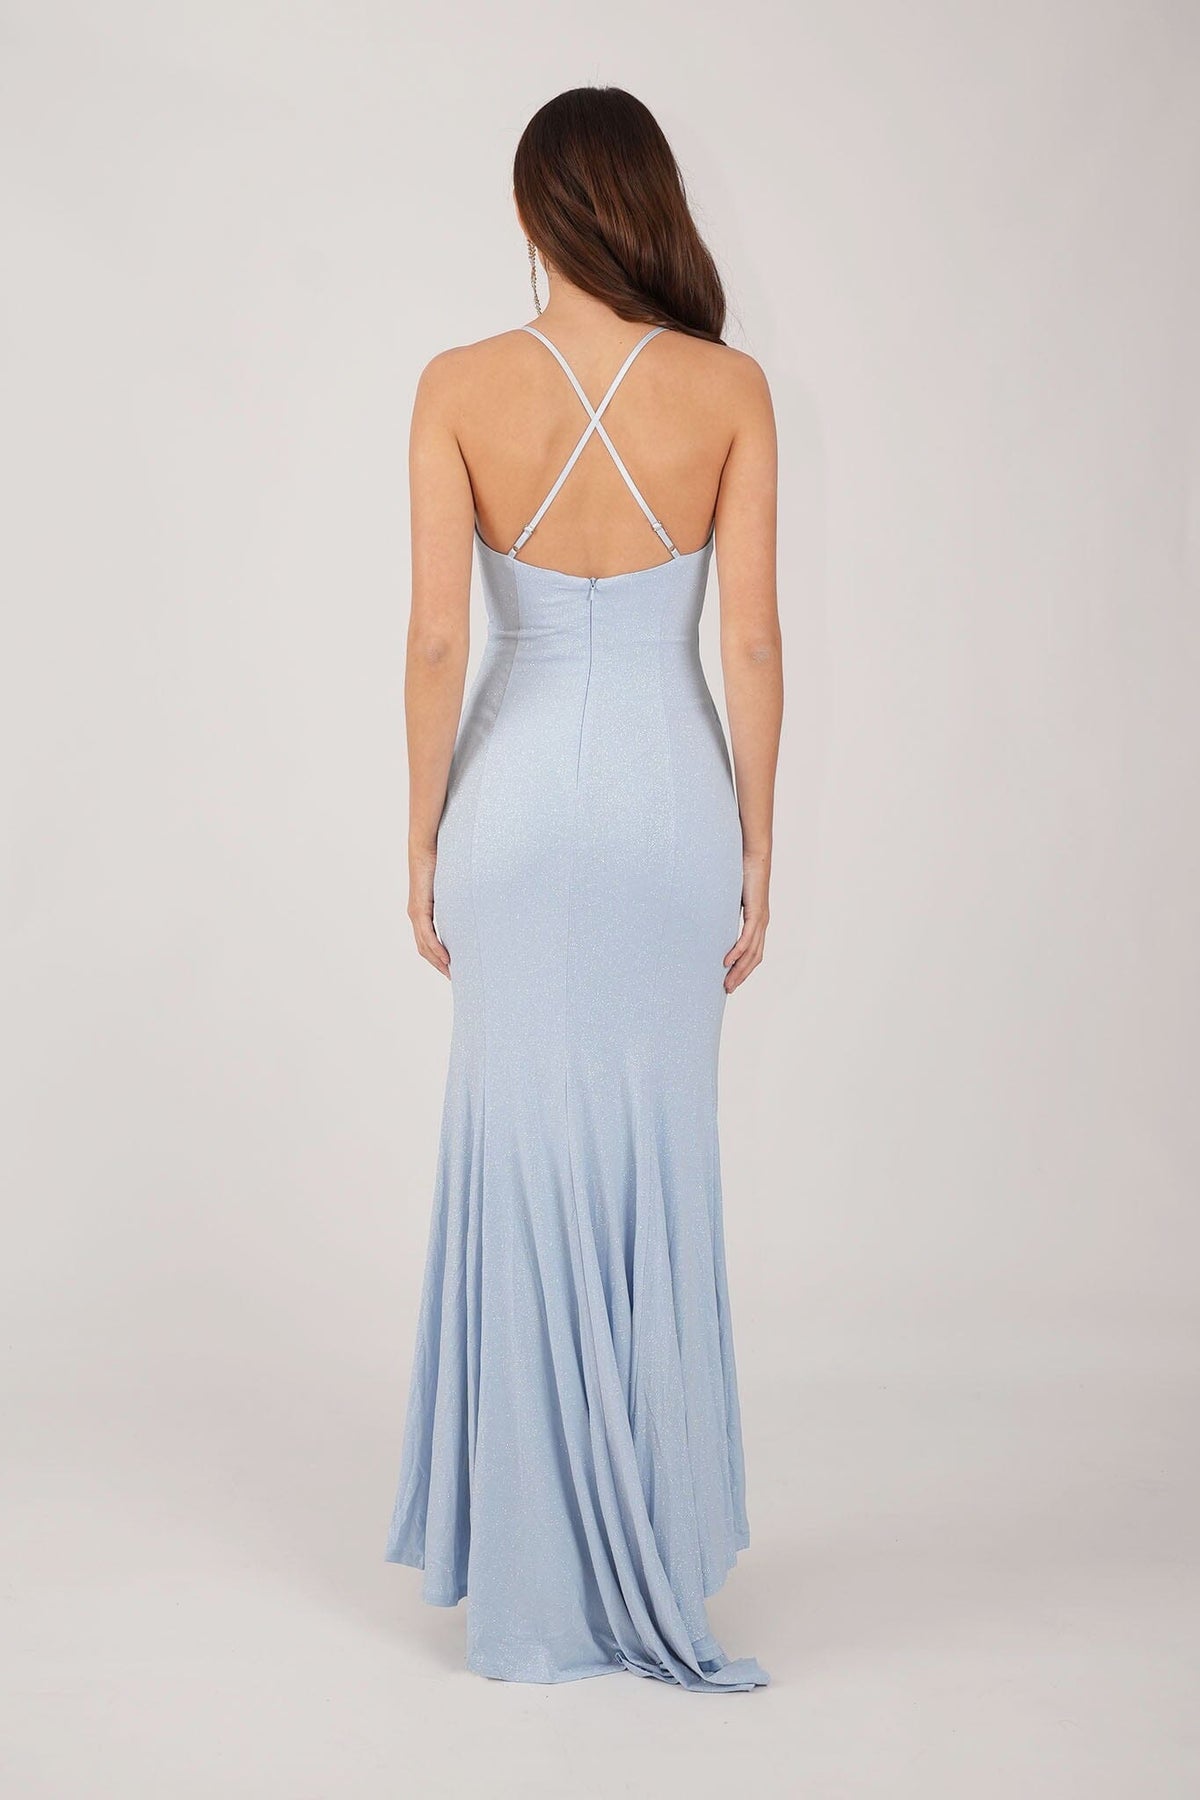 Crisscross adjustable back straps of Light Blue Shimmer Fitted Maxi Dress with Thin Shoulder Straps, Gathered Detail at Waist and Leg Slit